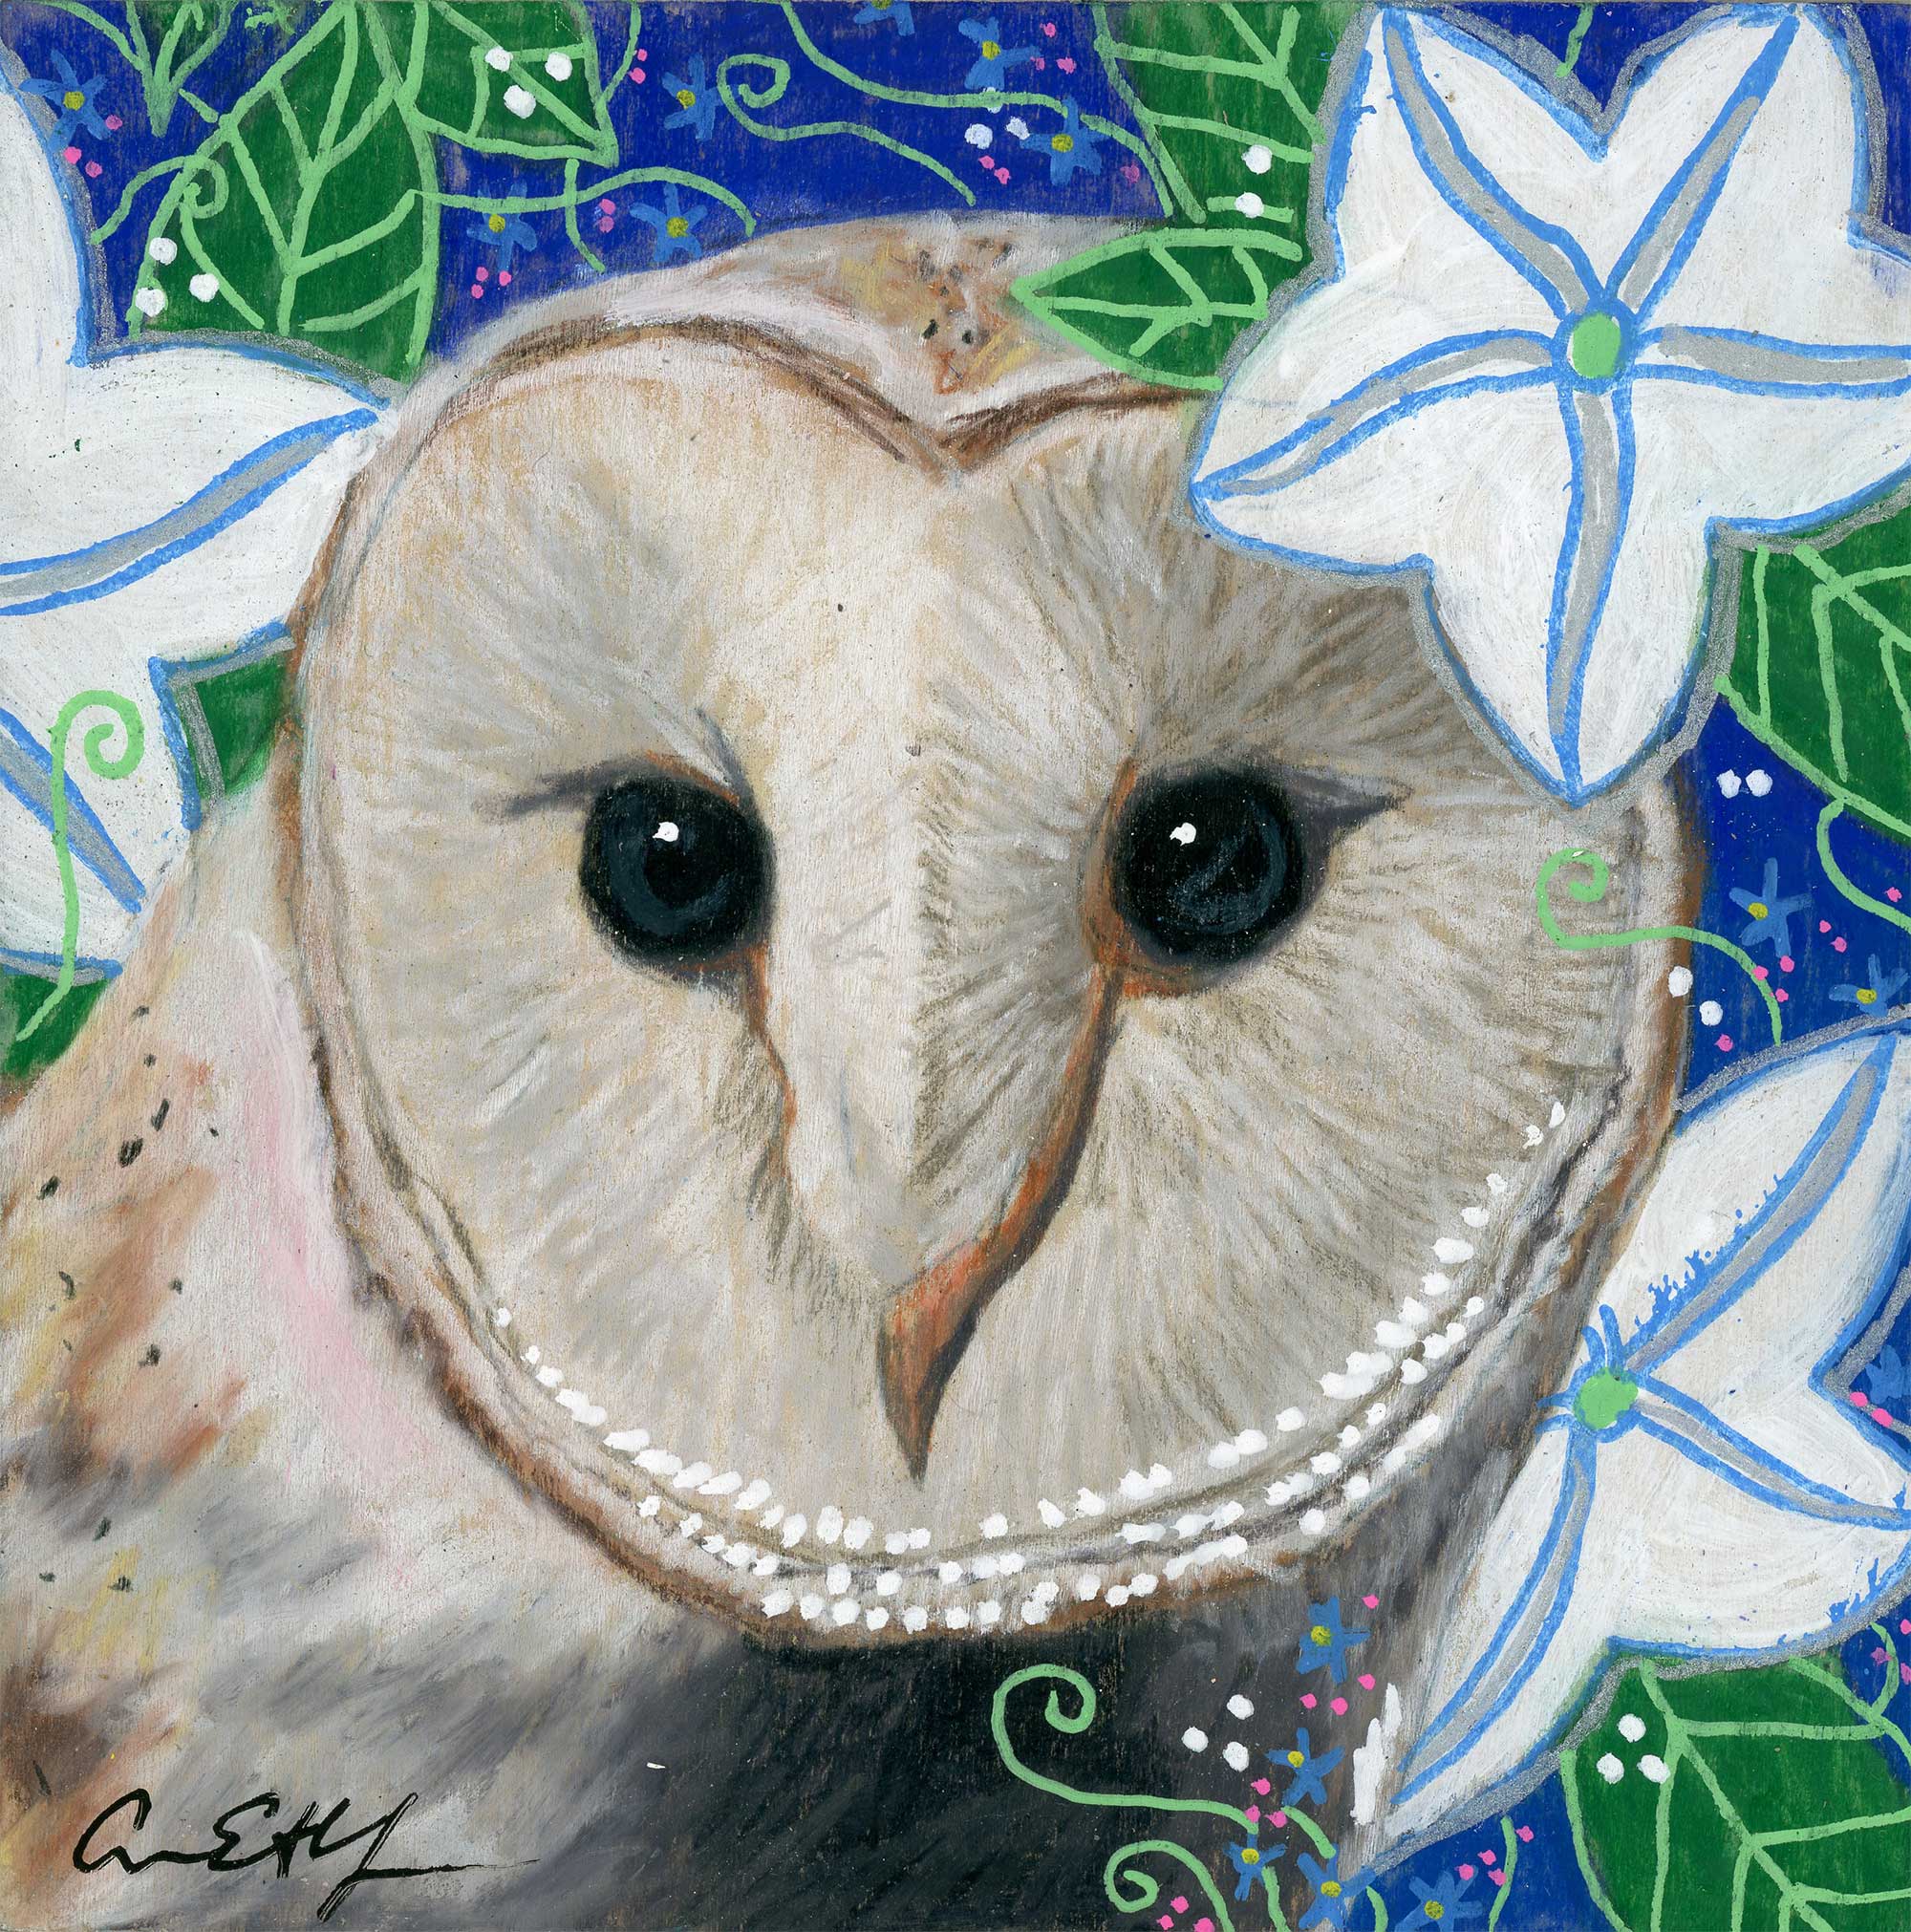 SOLD - "Barn Owl in Moon Flowers", 4" x4", mixed media